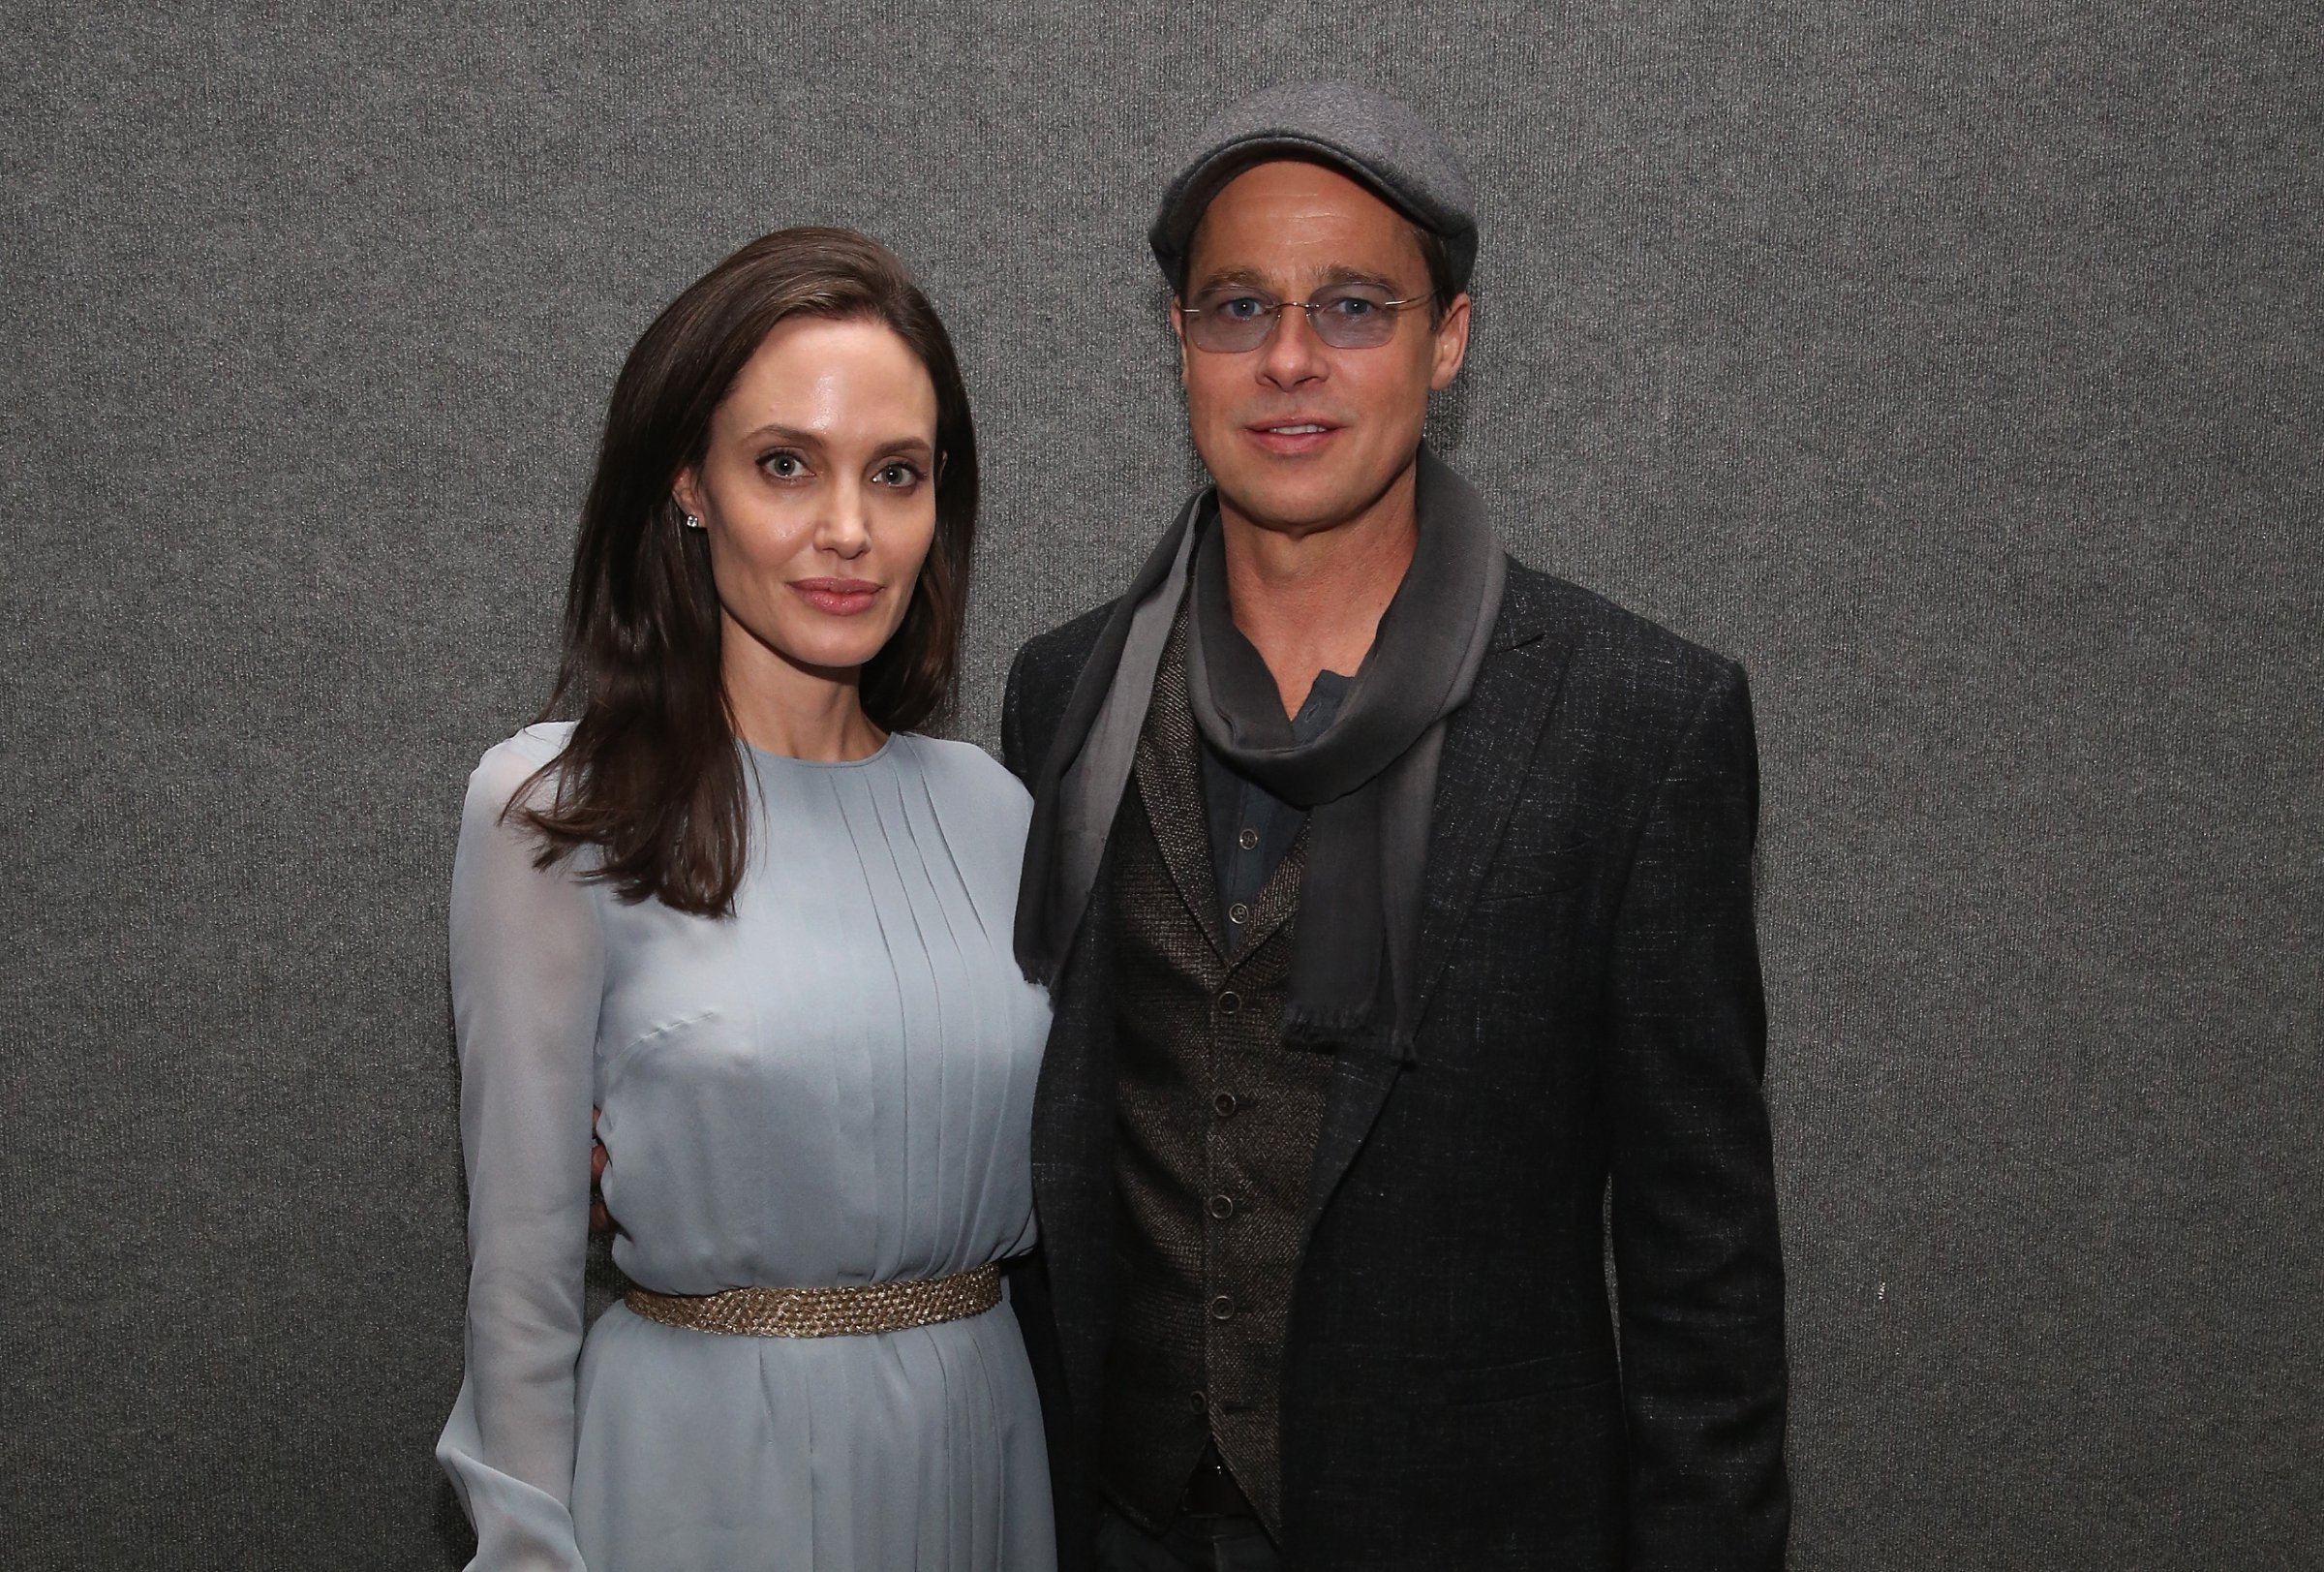 Angelina Jolie and Brad Pitt attend an official Academy Screening of BY THE SEA hosted by The Academy Of Motion Picture Arts And Sciences on November 3, 2015 in New York City.